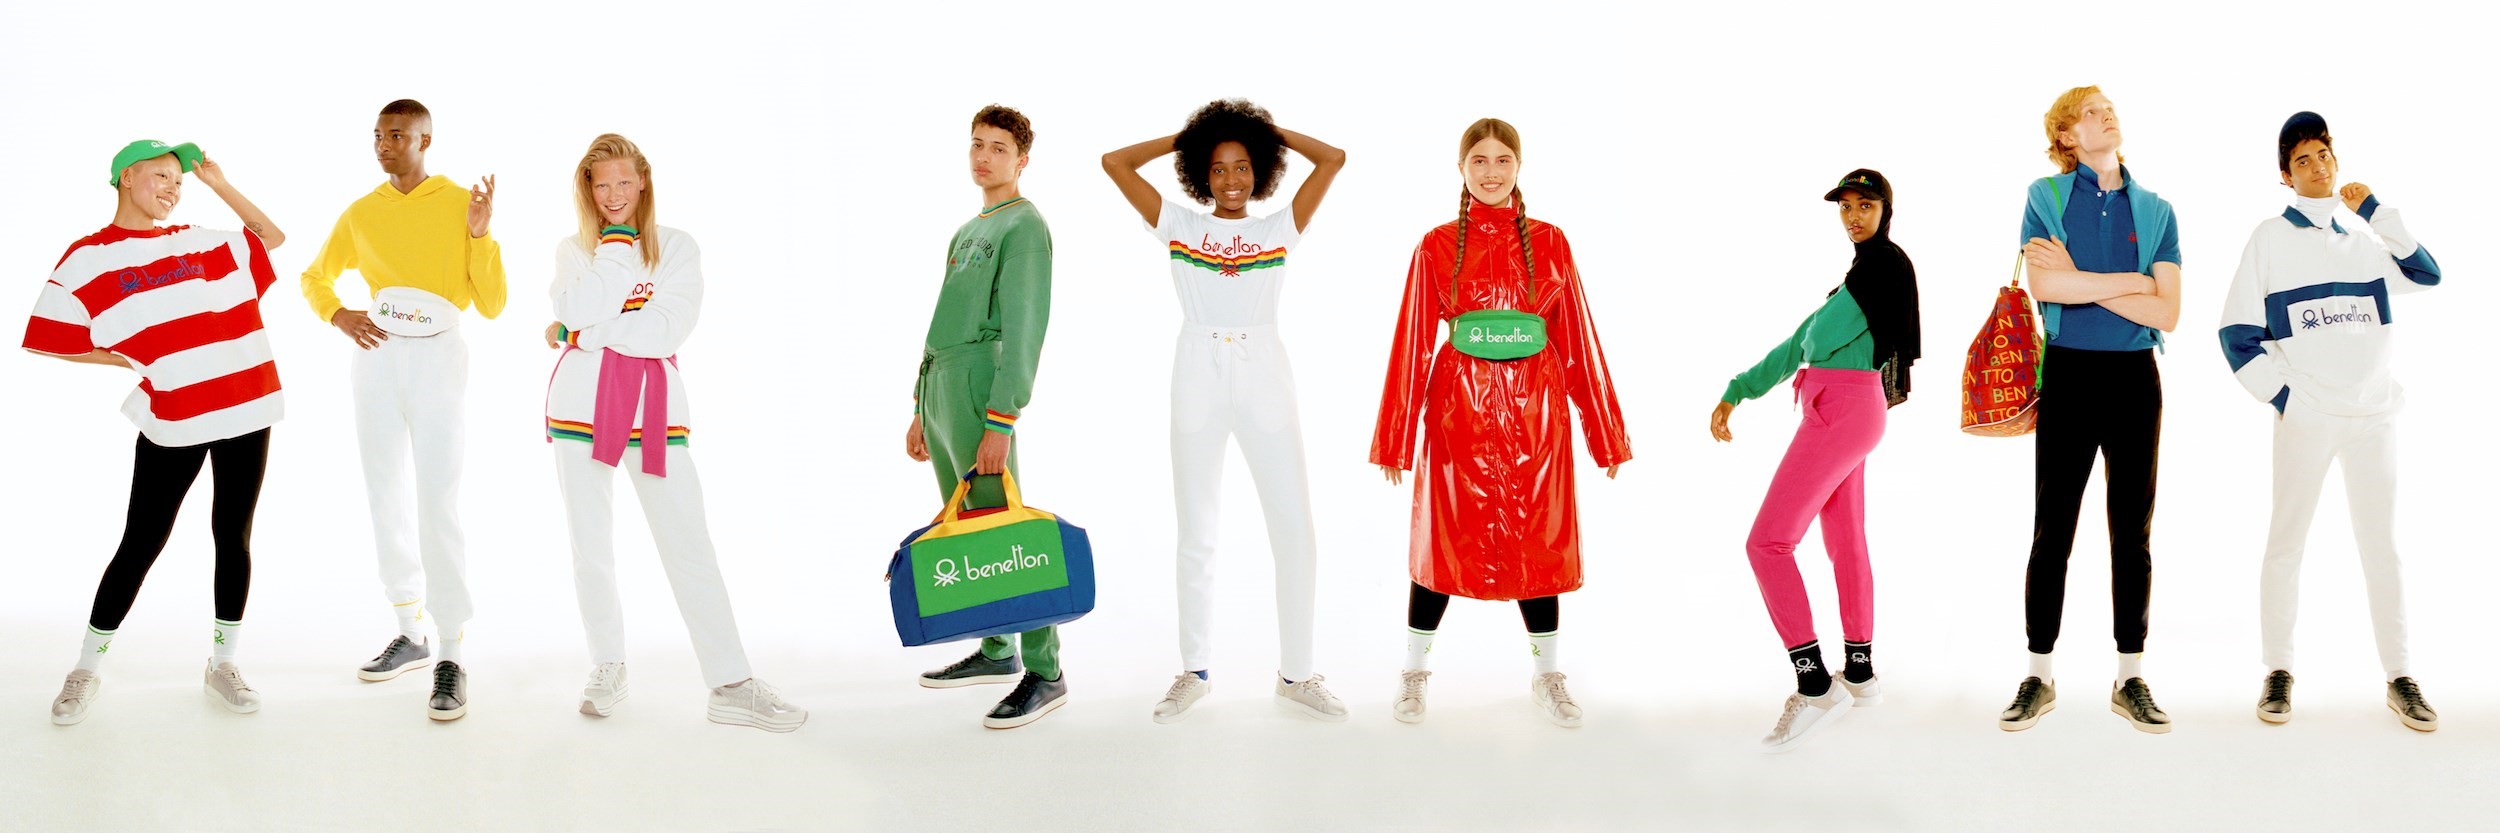 Attent Wiskunde bladzijde Benetton revives 80s and 00s archive designs for new capsule | Dazed